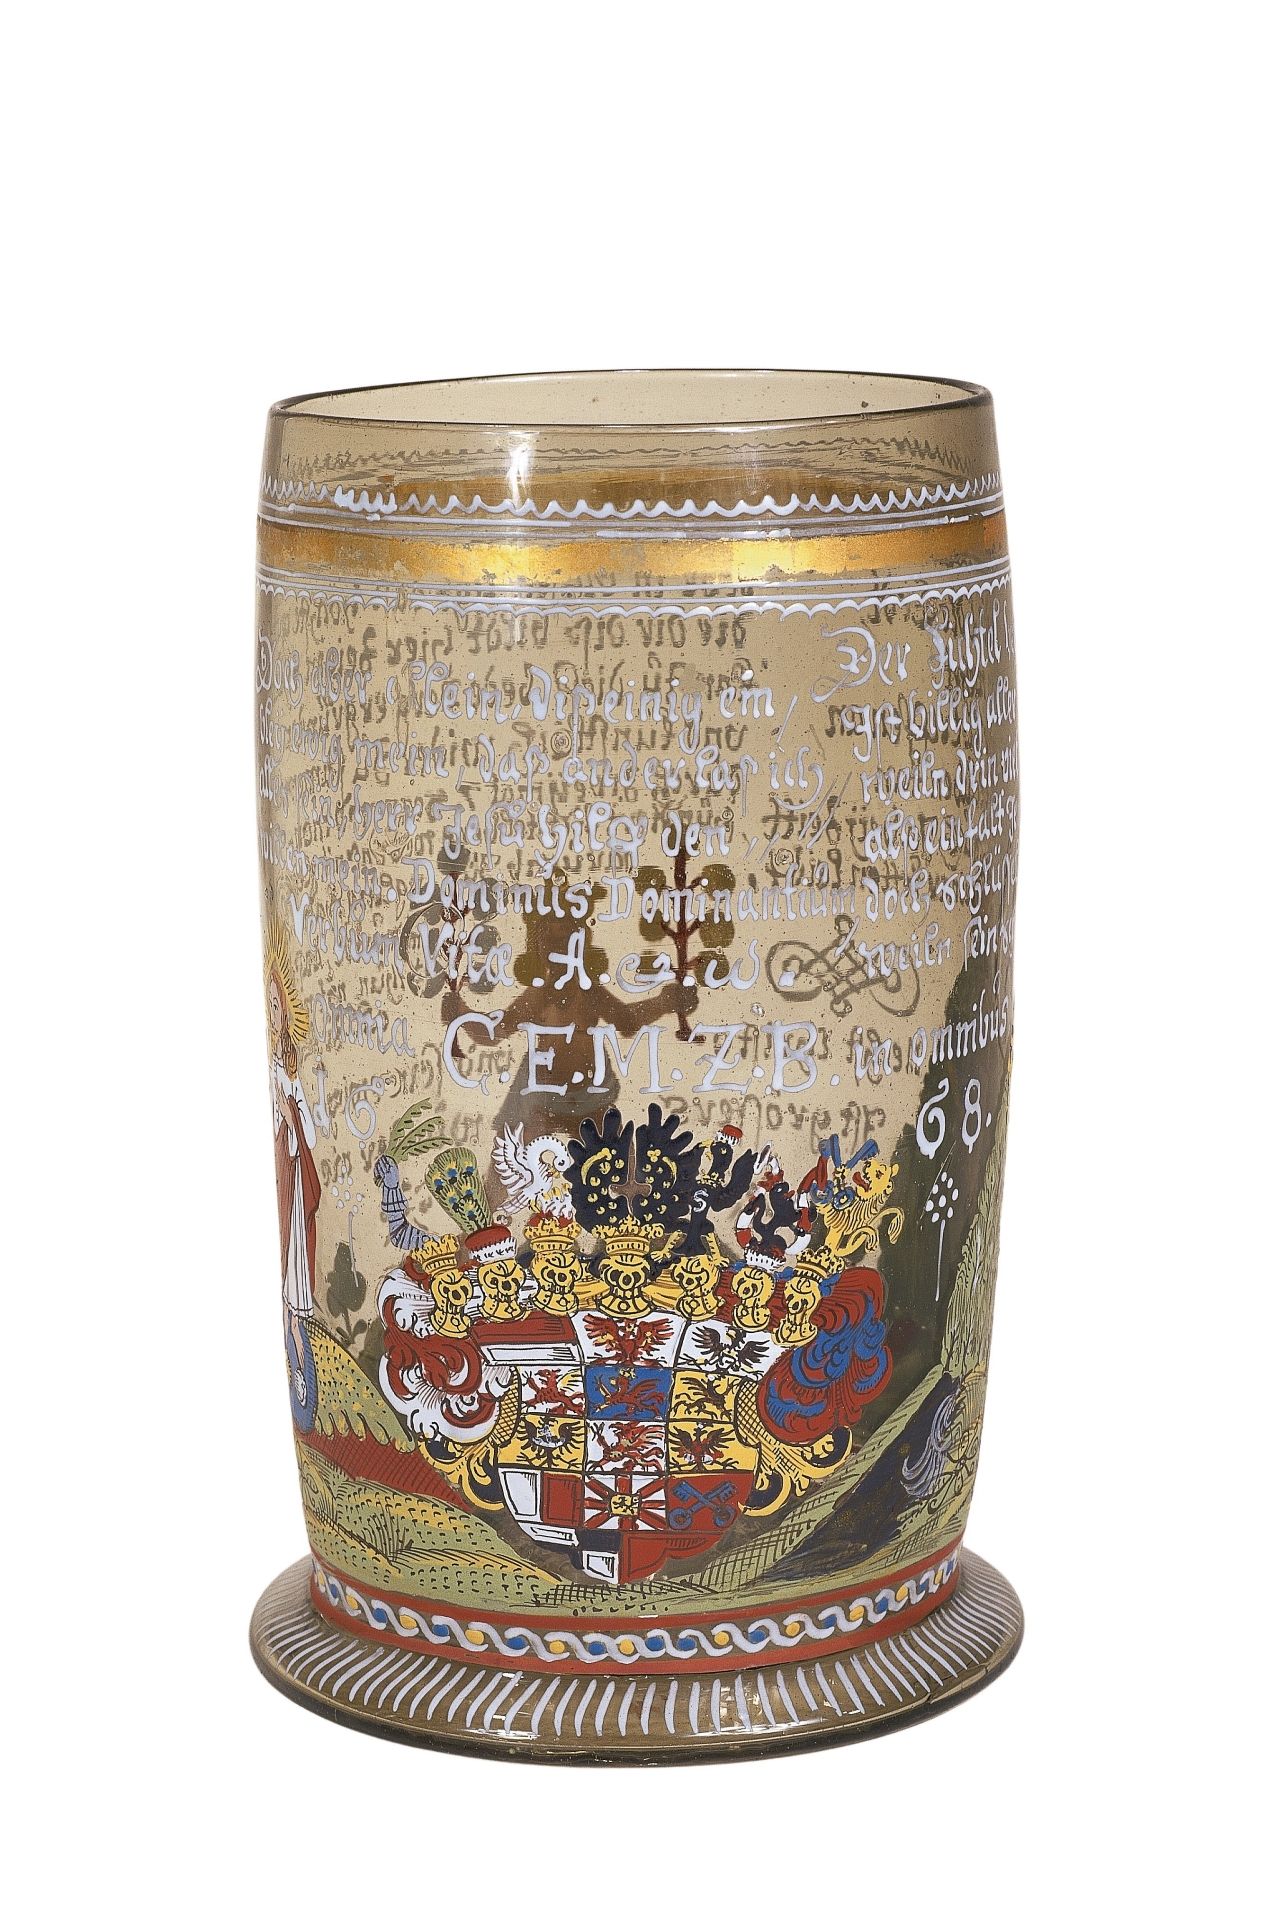 franconia-glas-tankard-dated-1668-coat-of-arms-elector-17th-century